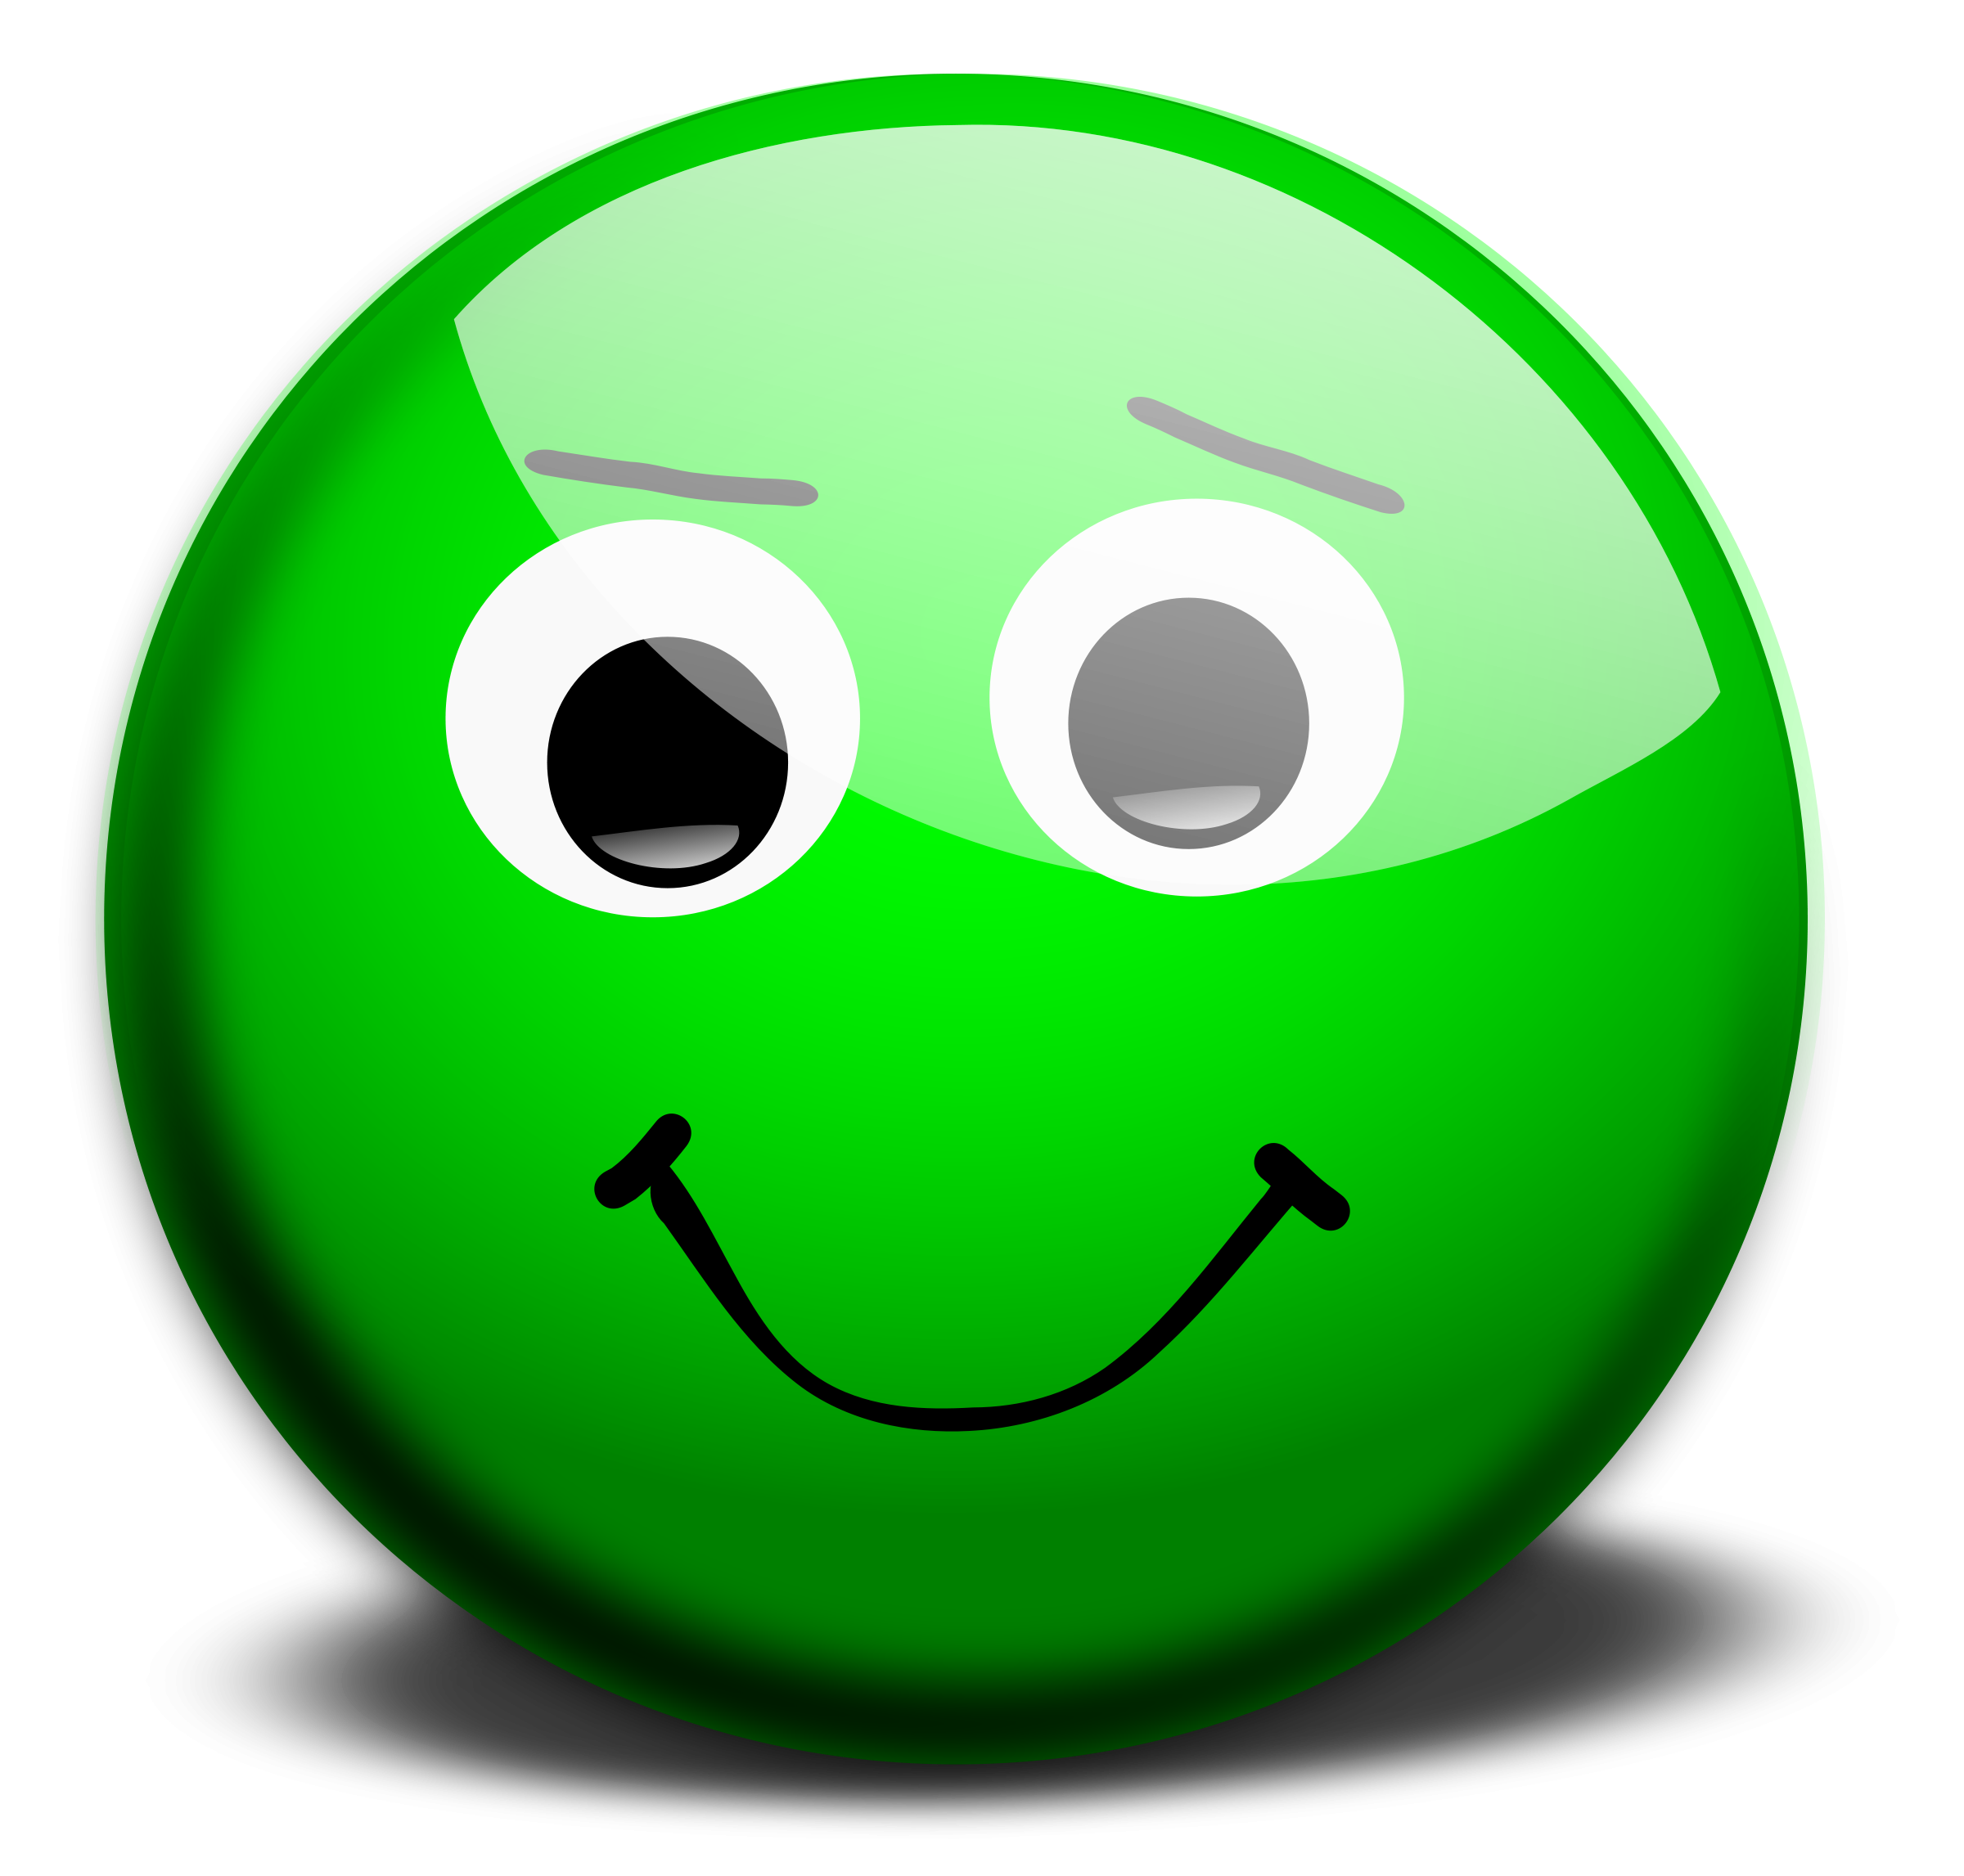 Green Smiley Clipart Best